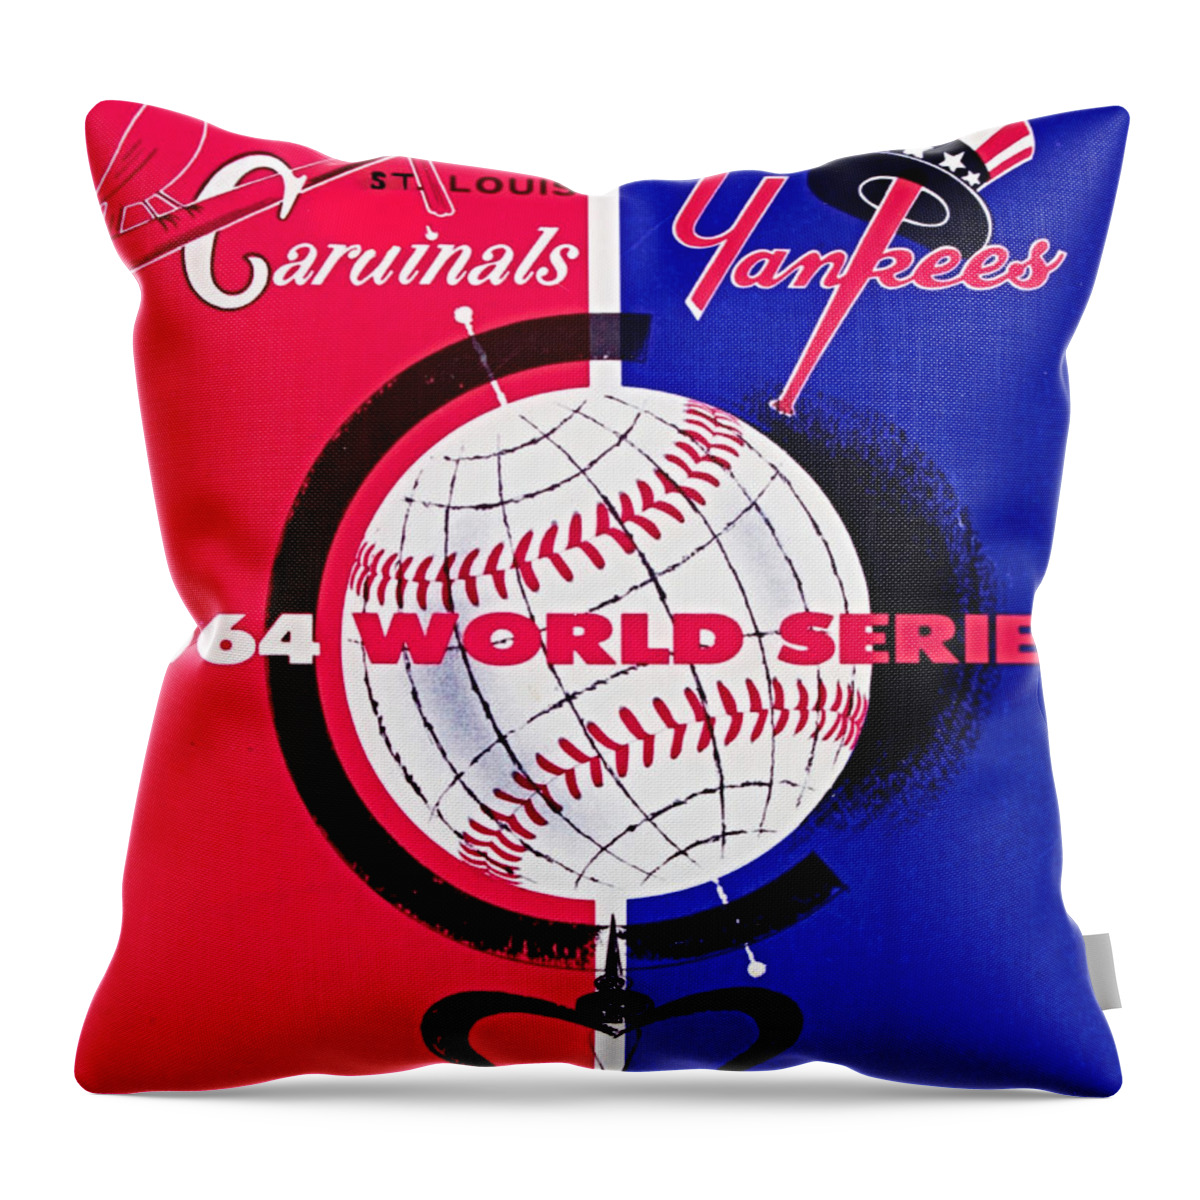 St. Louis Cardinals Throw Pillow featuring the mixed media 1964 World Series Program by Row One Brand